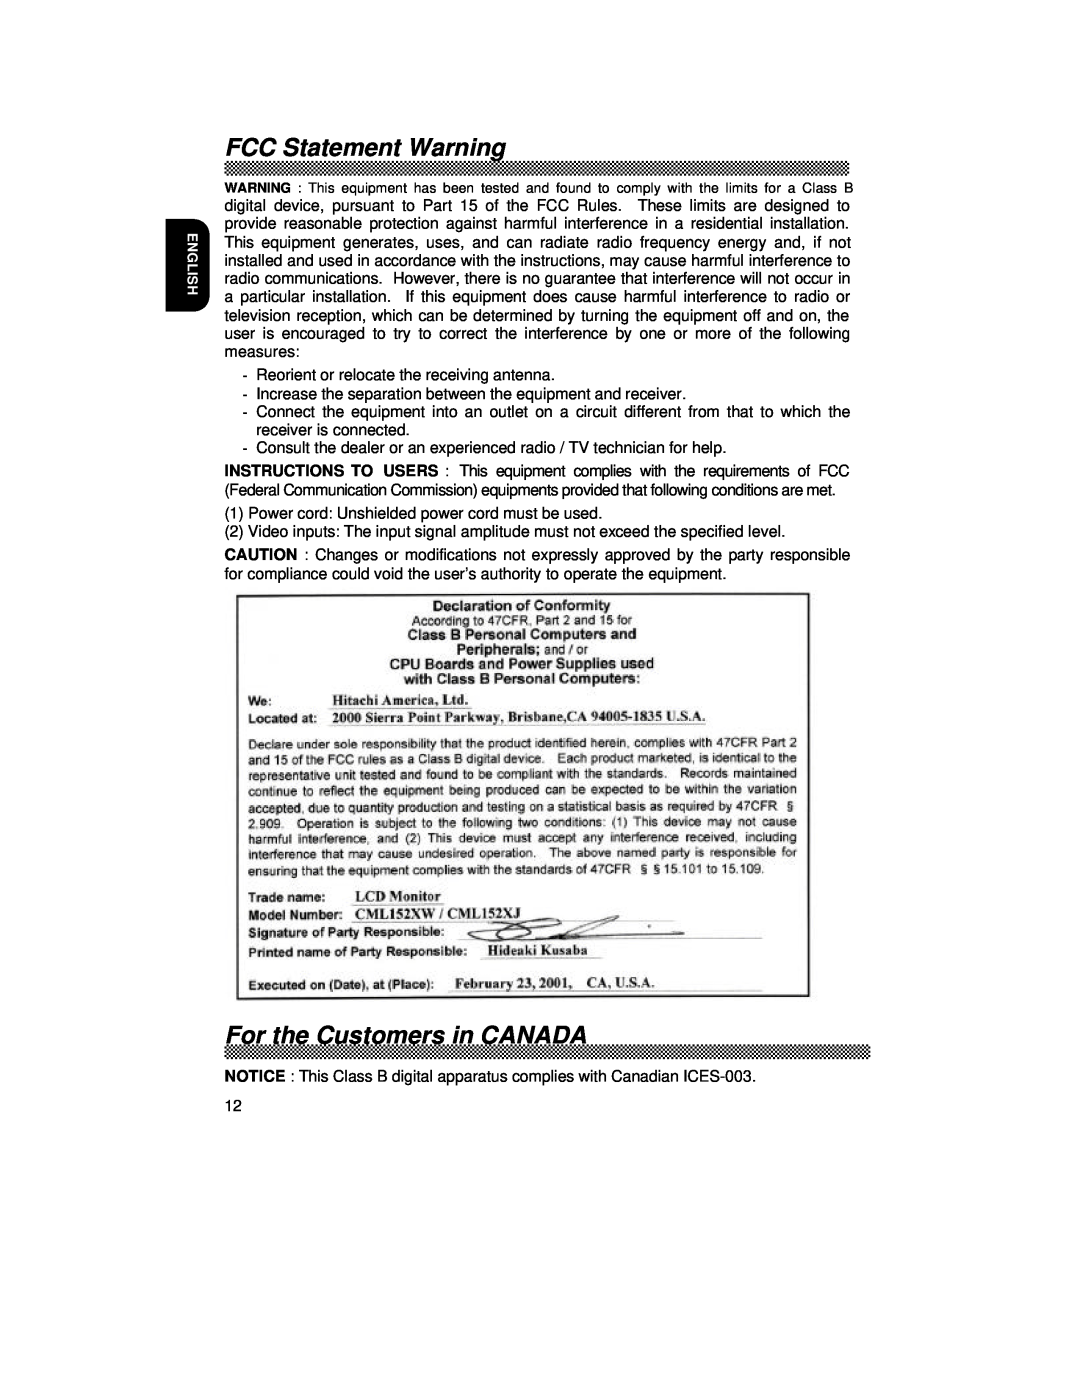 Hitachi CML152XW manual FCC Statement Warning, For the Customers in CANADA 